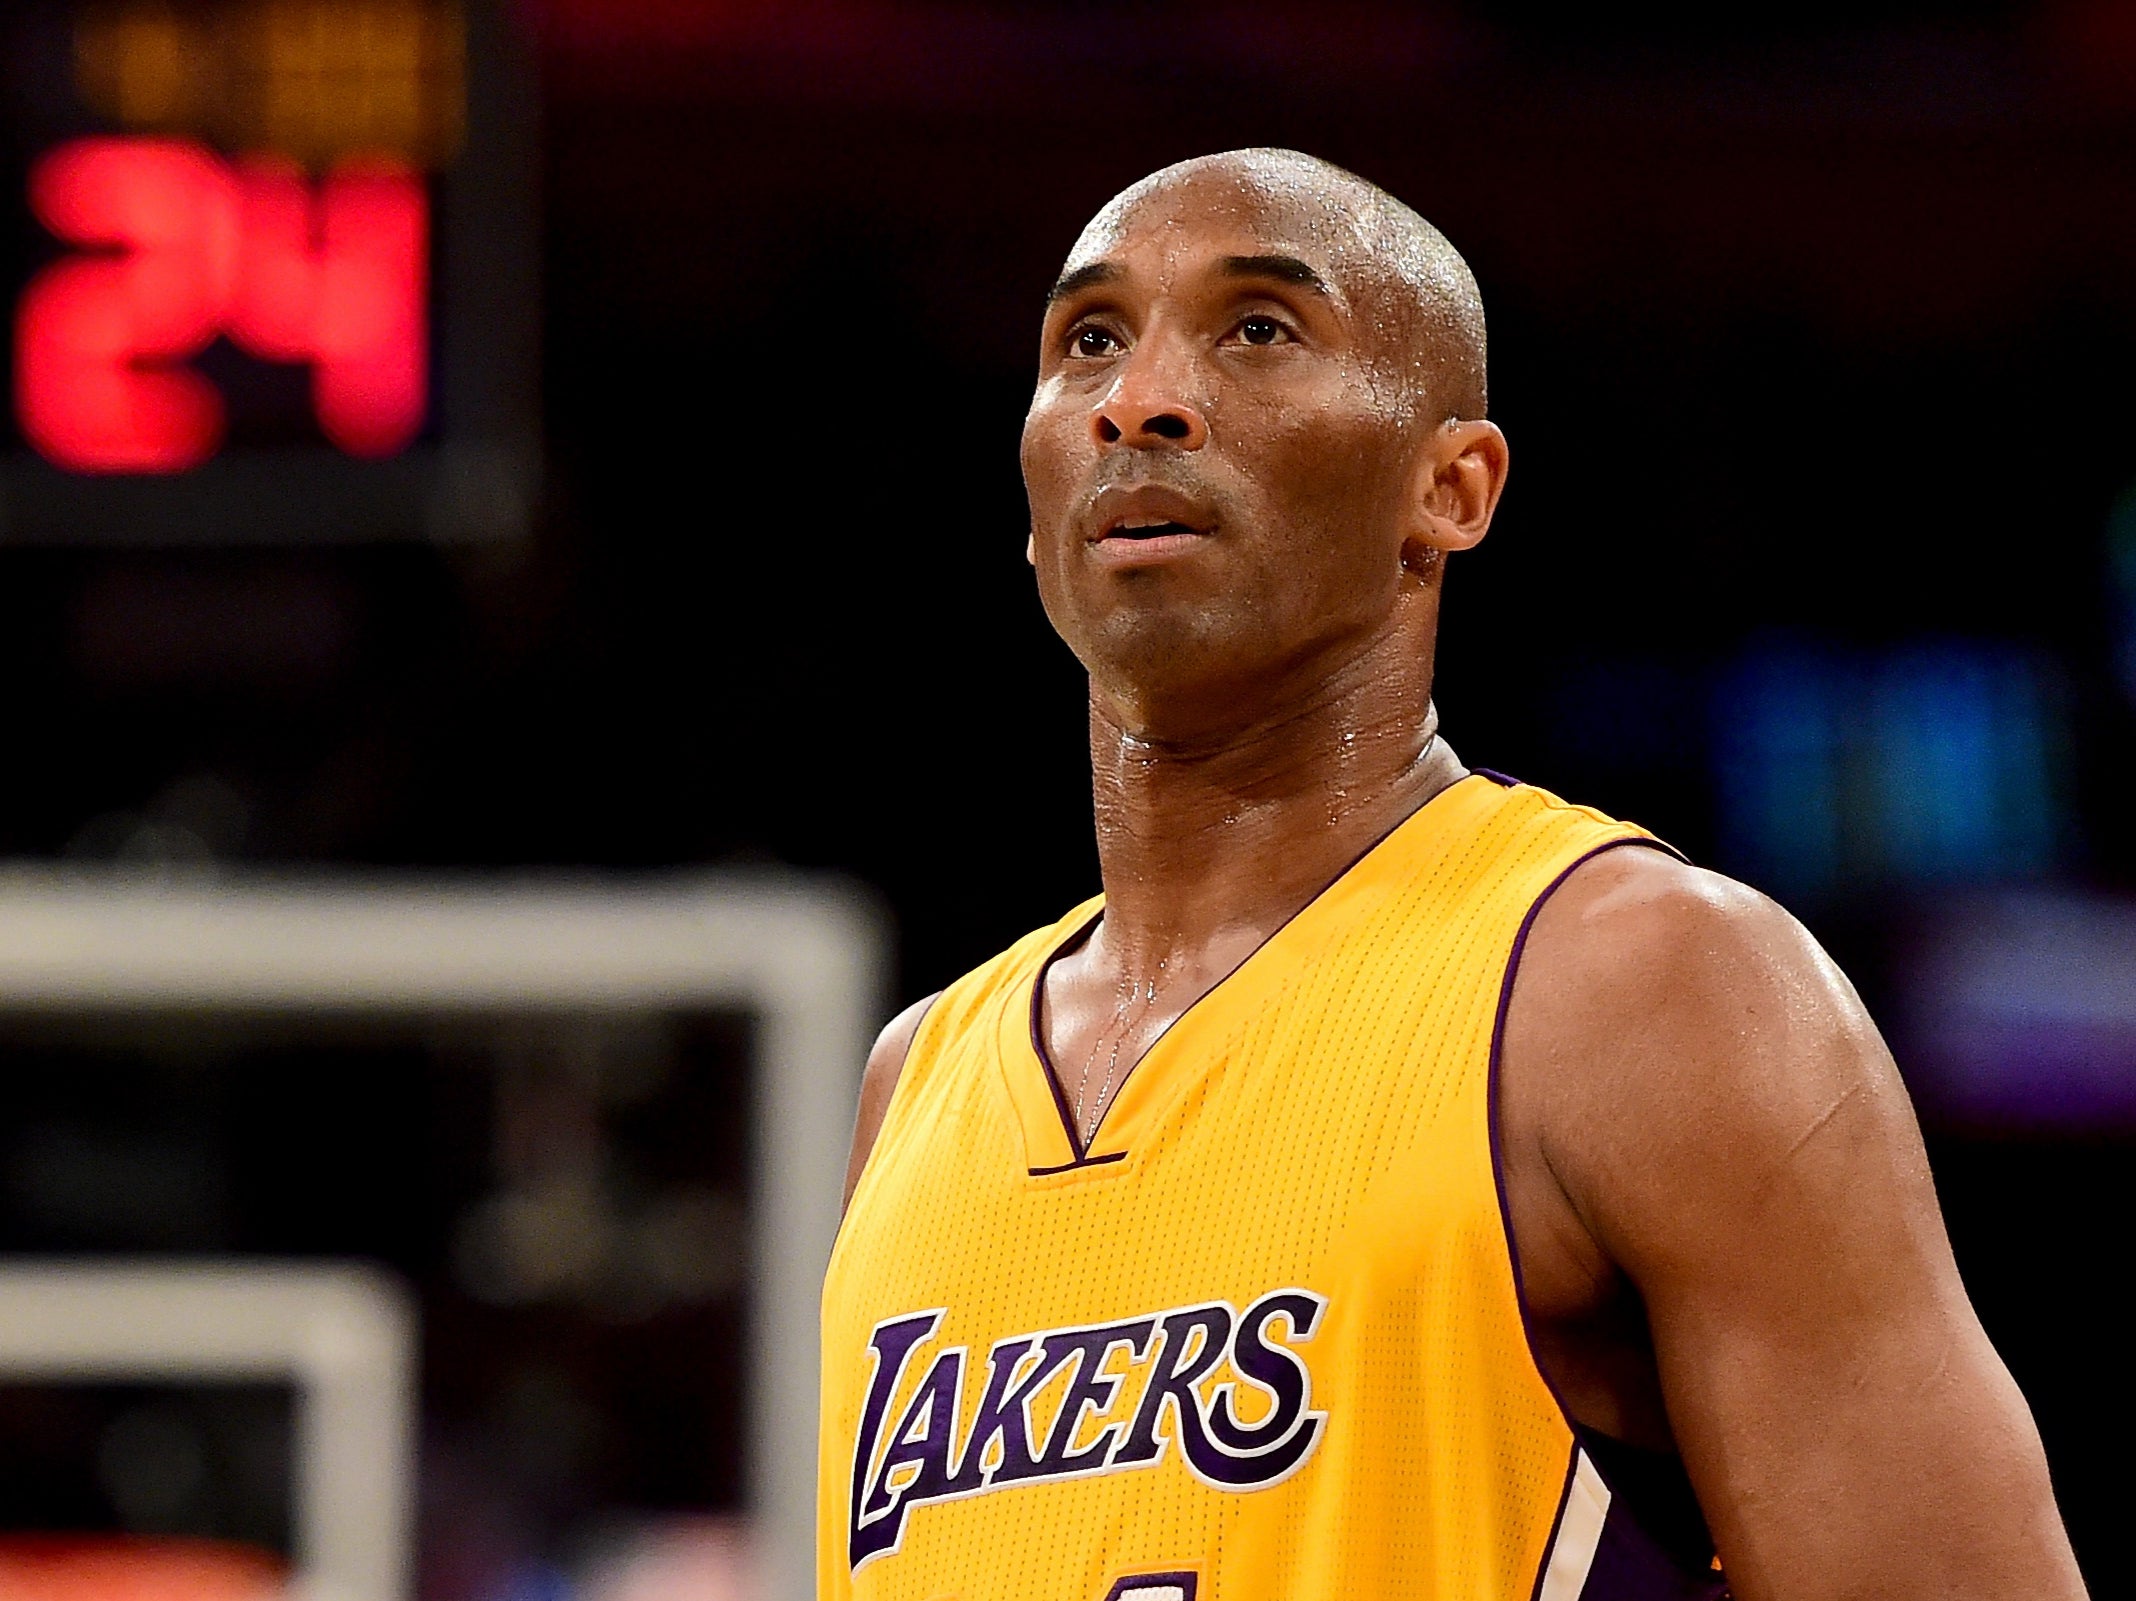 Vanessa Bryant Responds After Kyrie Irving Suggests Kobe Bryant's